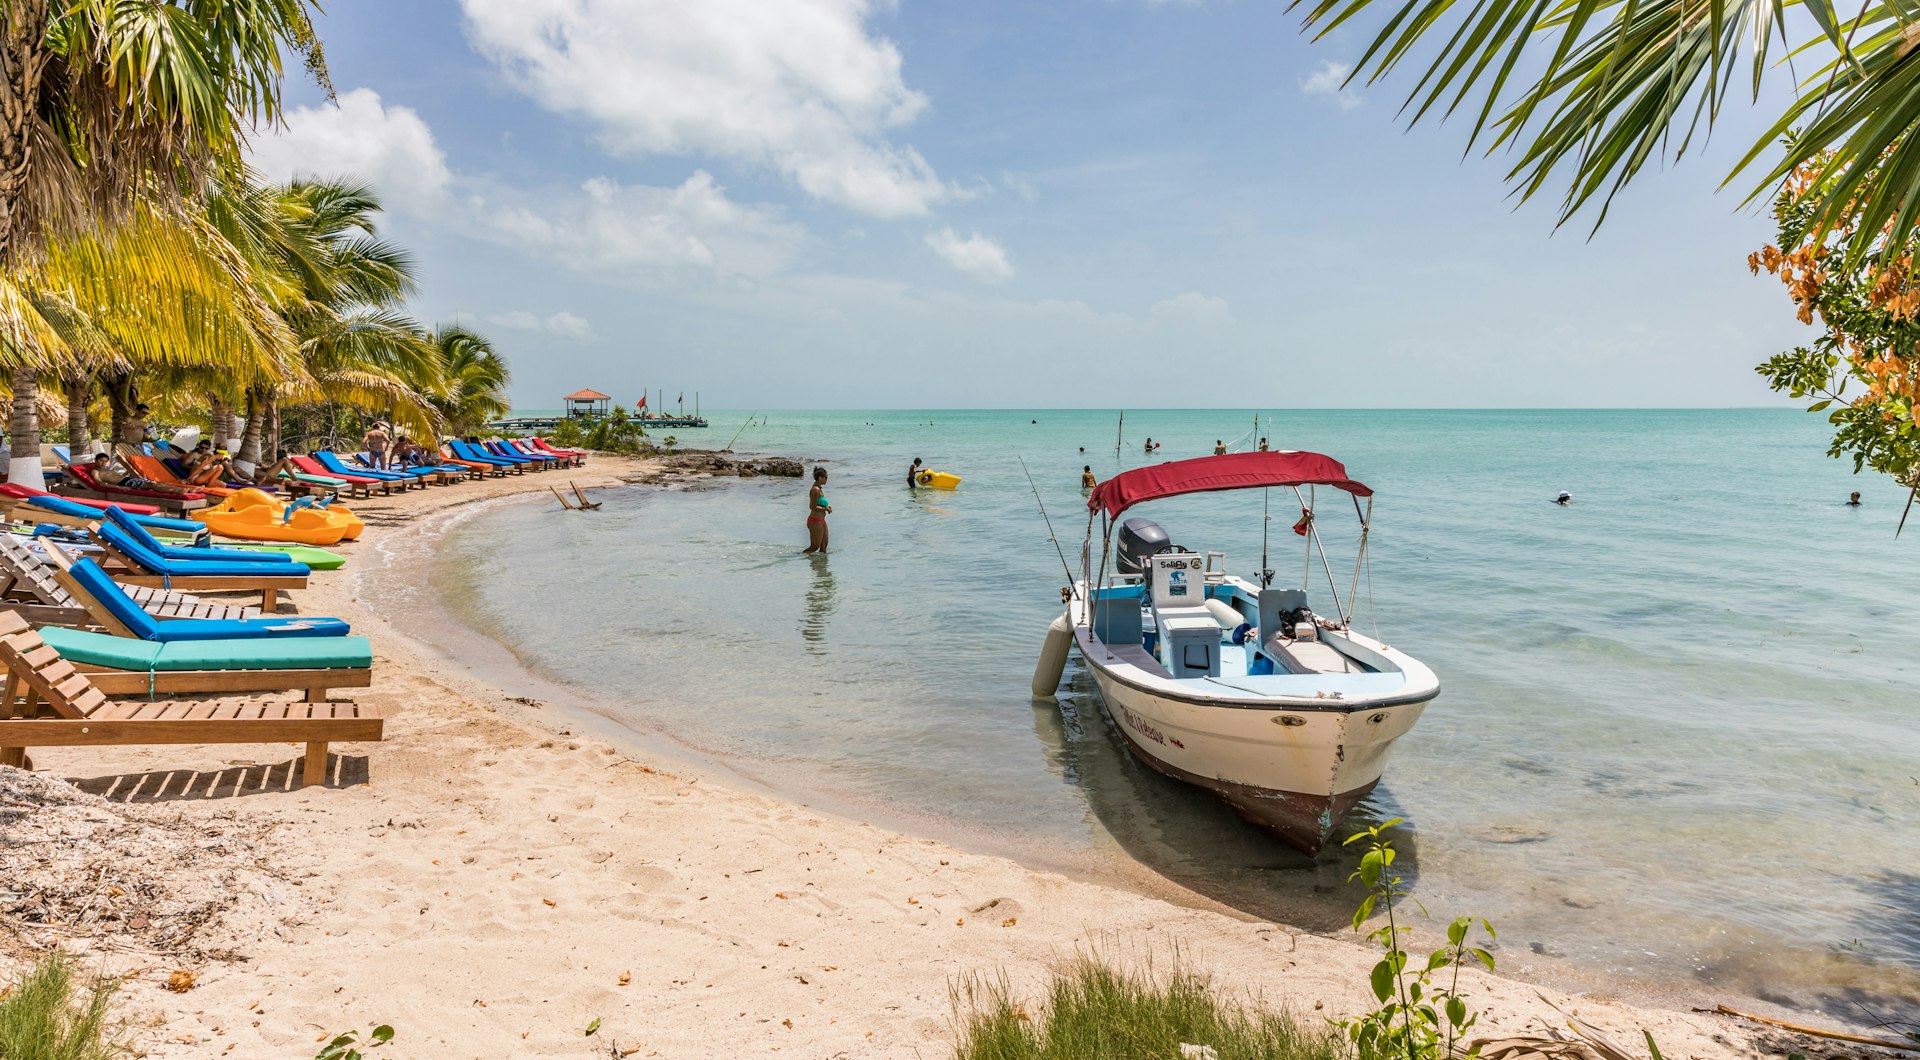 Lounge chairs, a woman in a bikini wading in the water, and a boat anchored just off the beach